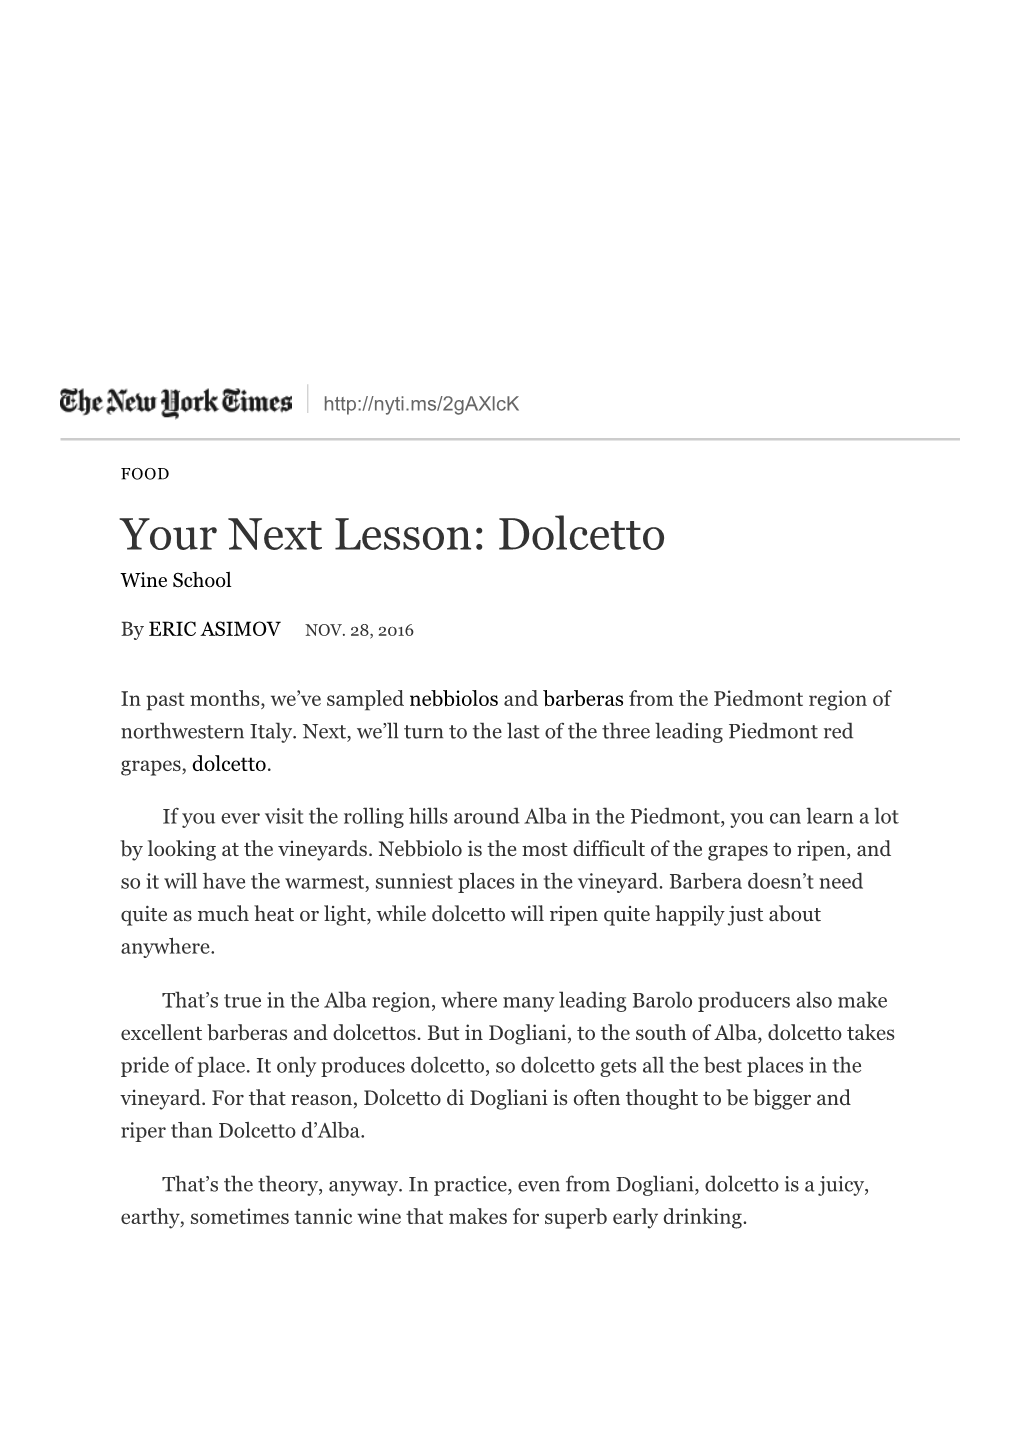 Your Next Lesson: Dolcetto Wine School